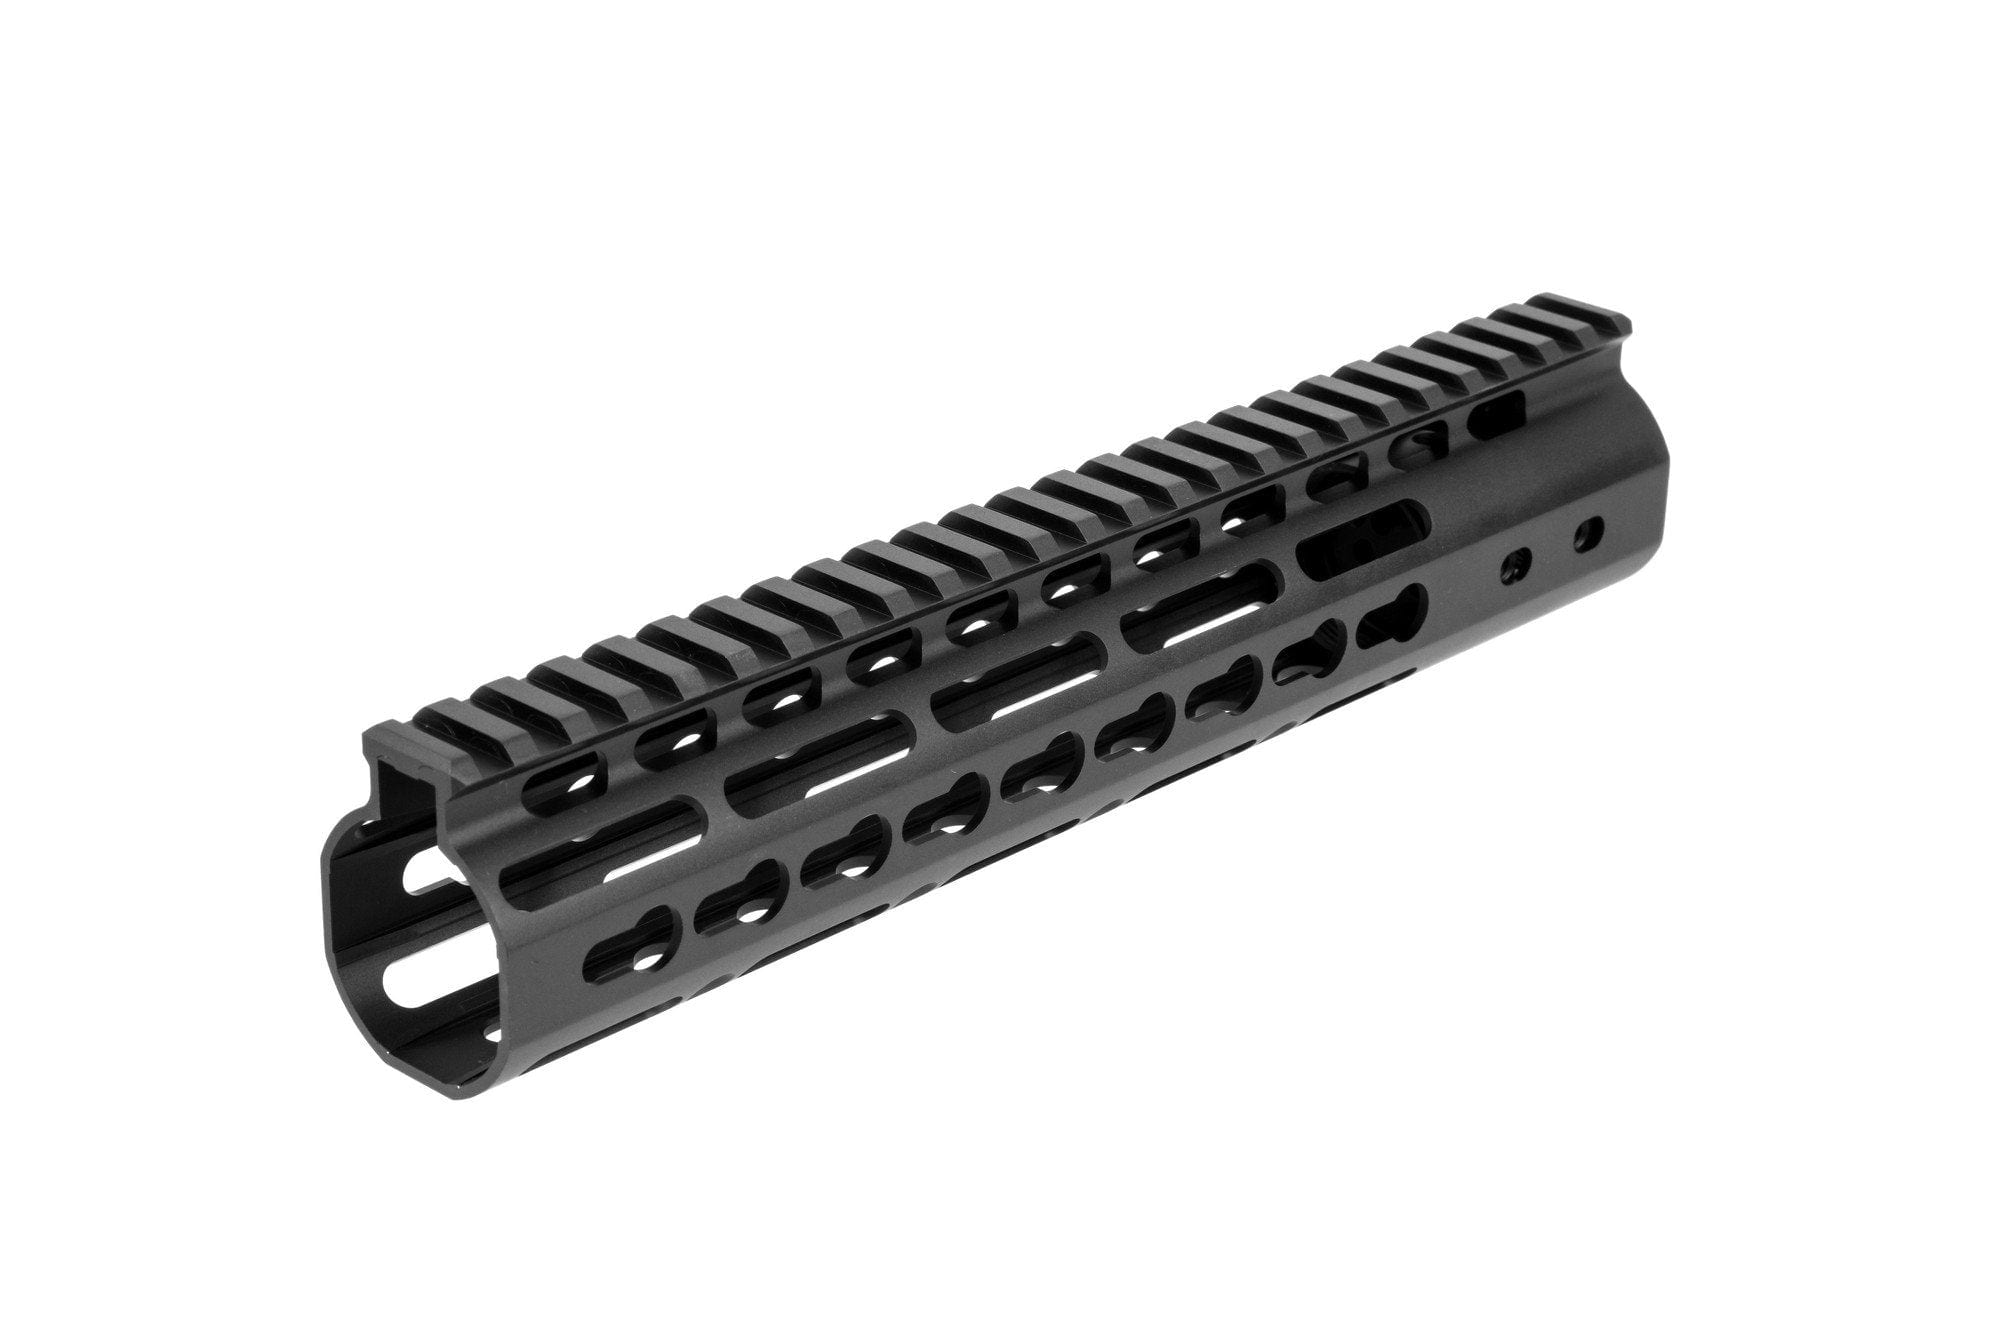 KeyModx CNC 10 "rail mount by Specna Arms on Airsoft Mania Europe